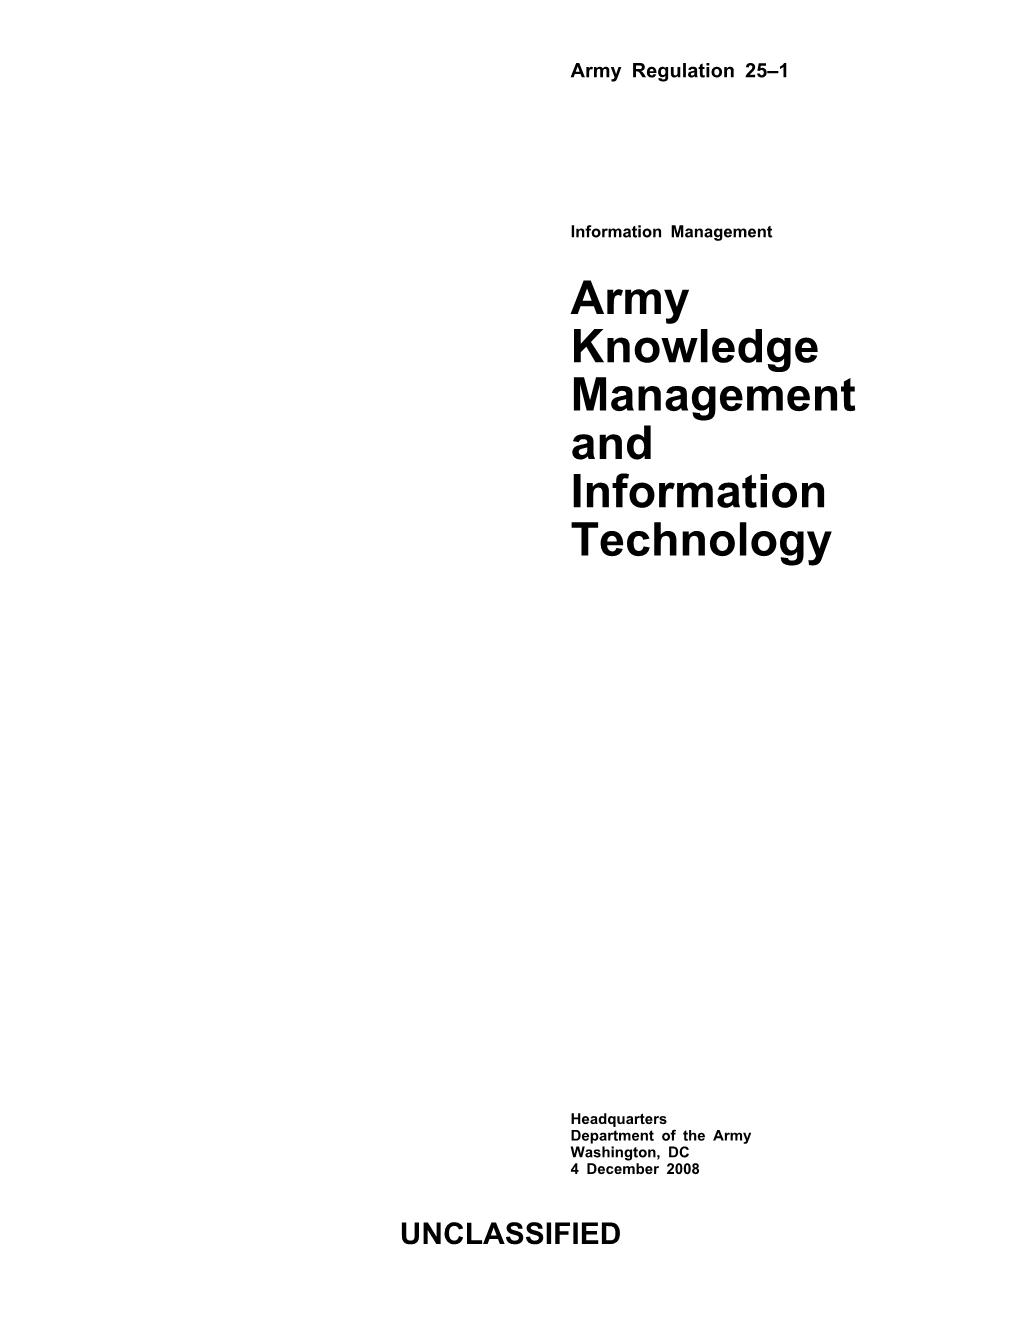 Army Knowledge Management and Information Technology